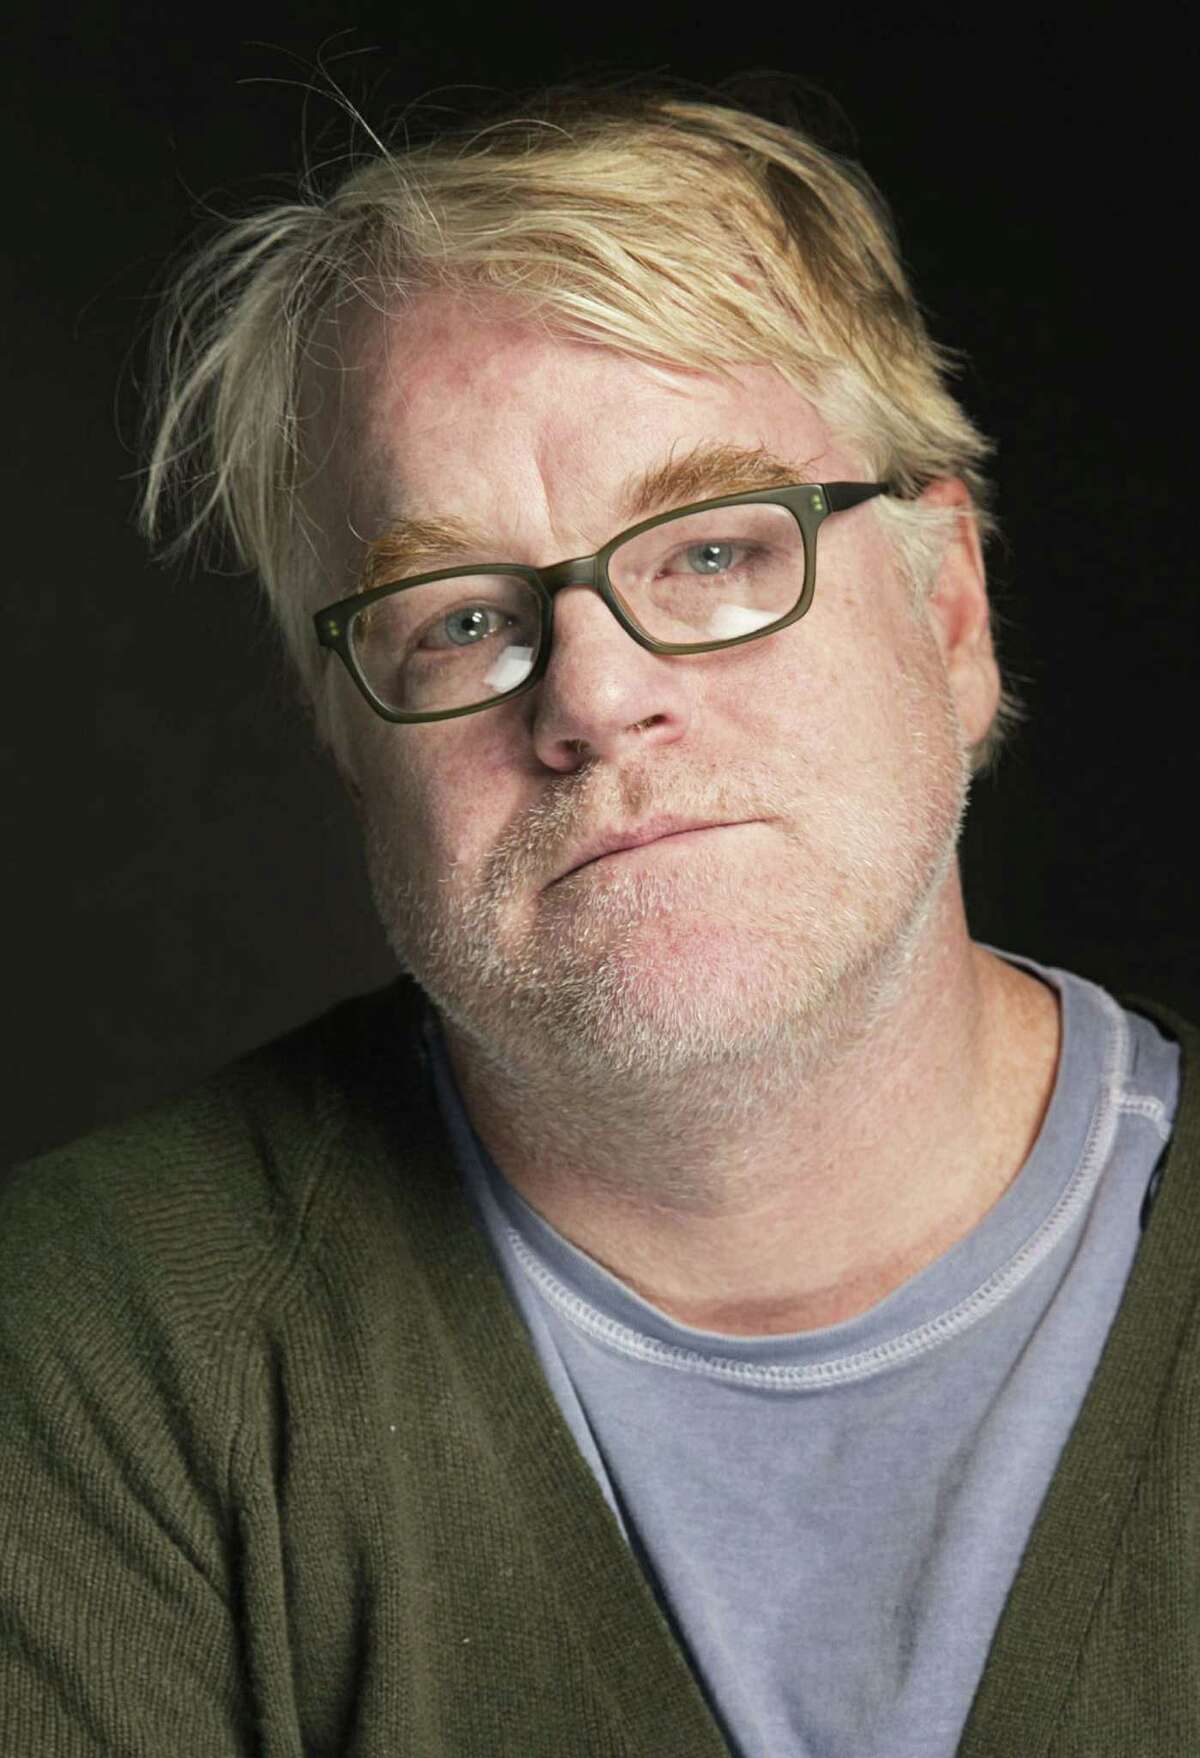 Actor Philip Seymour Hoffman, 46, had struggled with substance abuse.